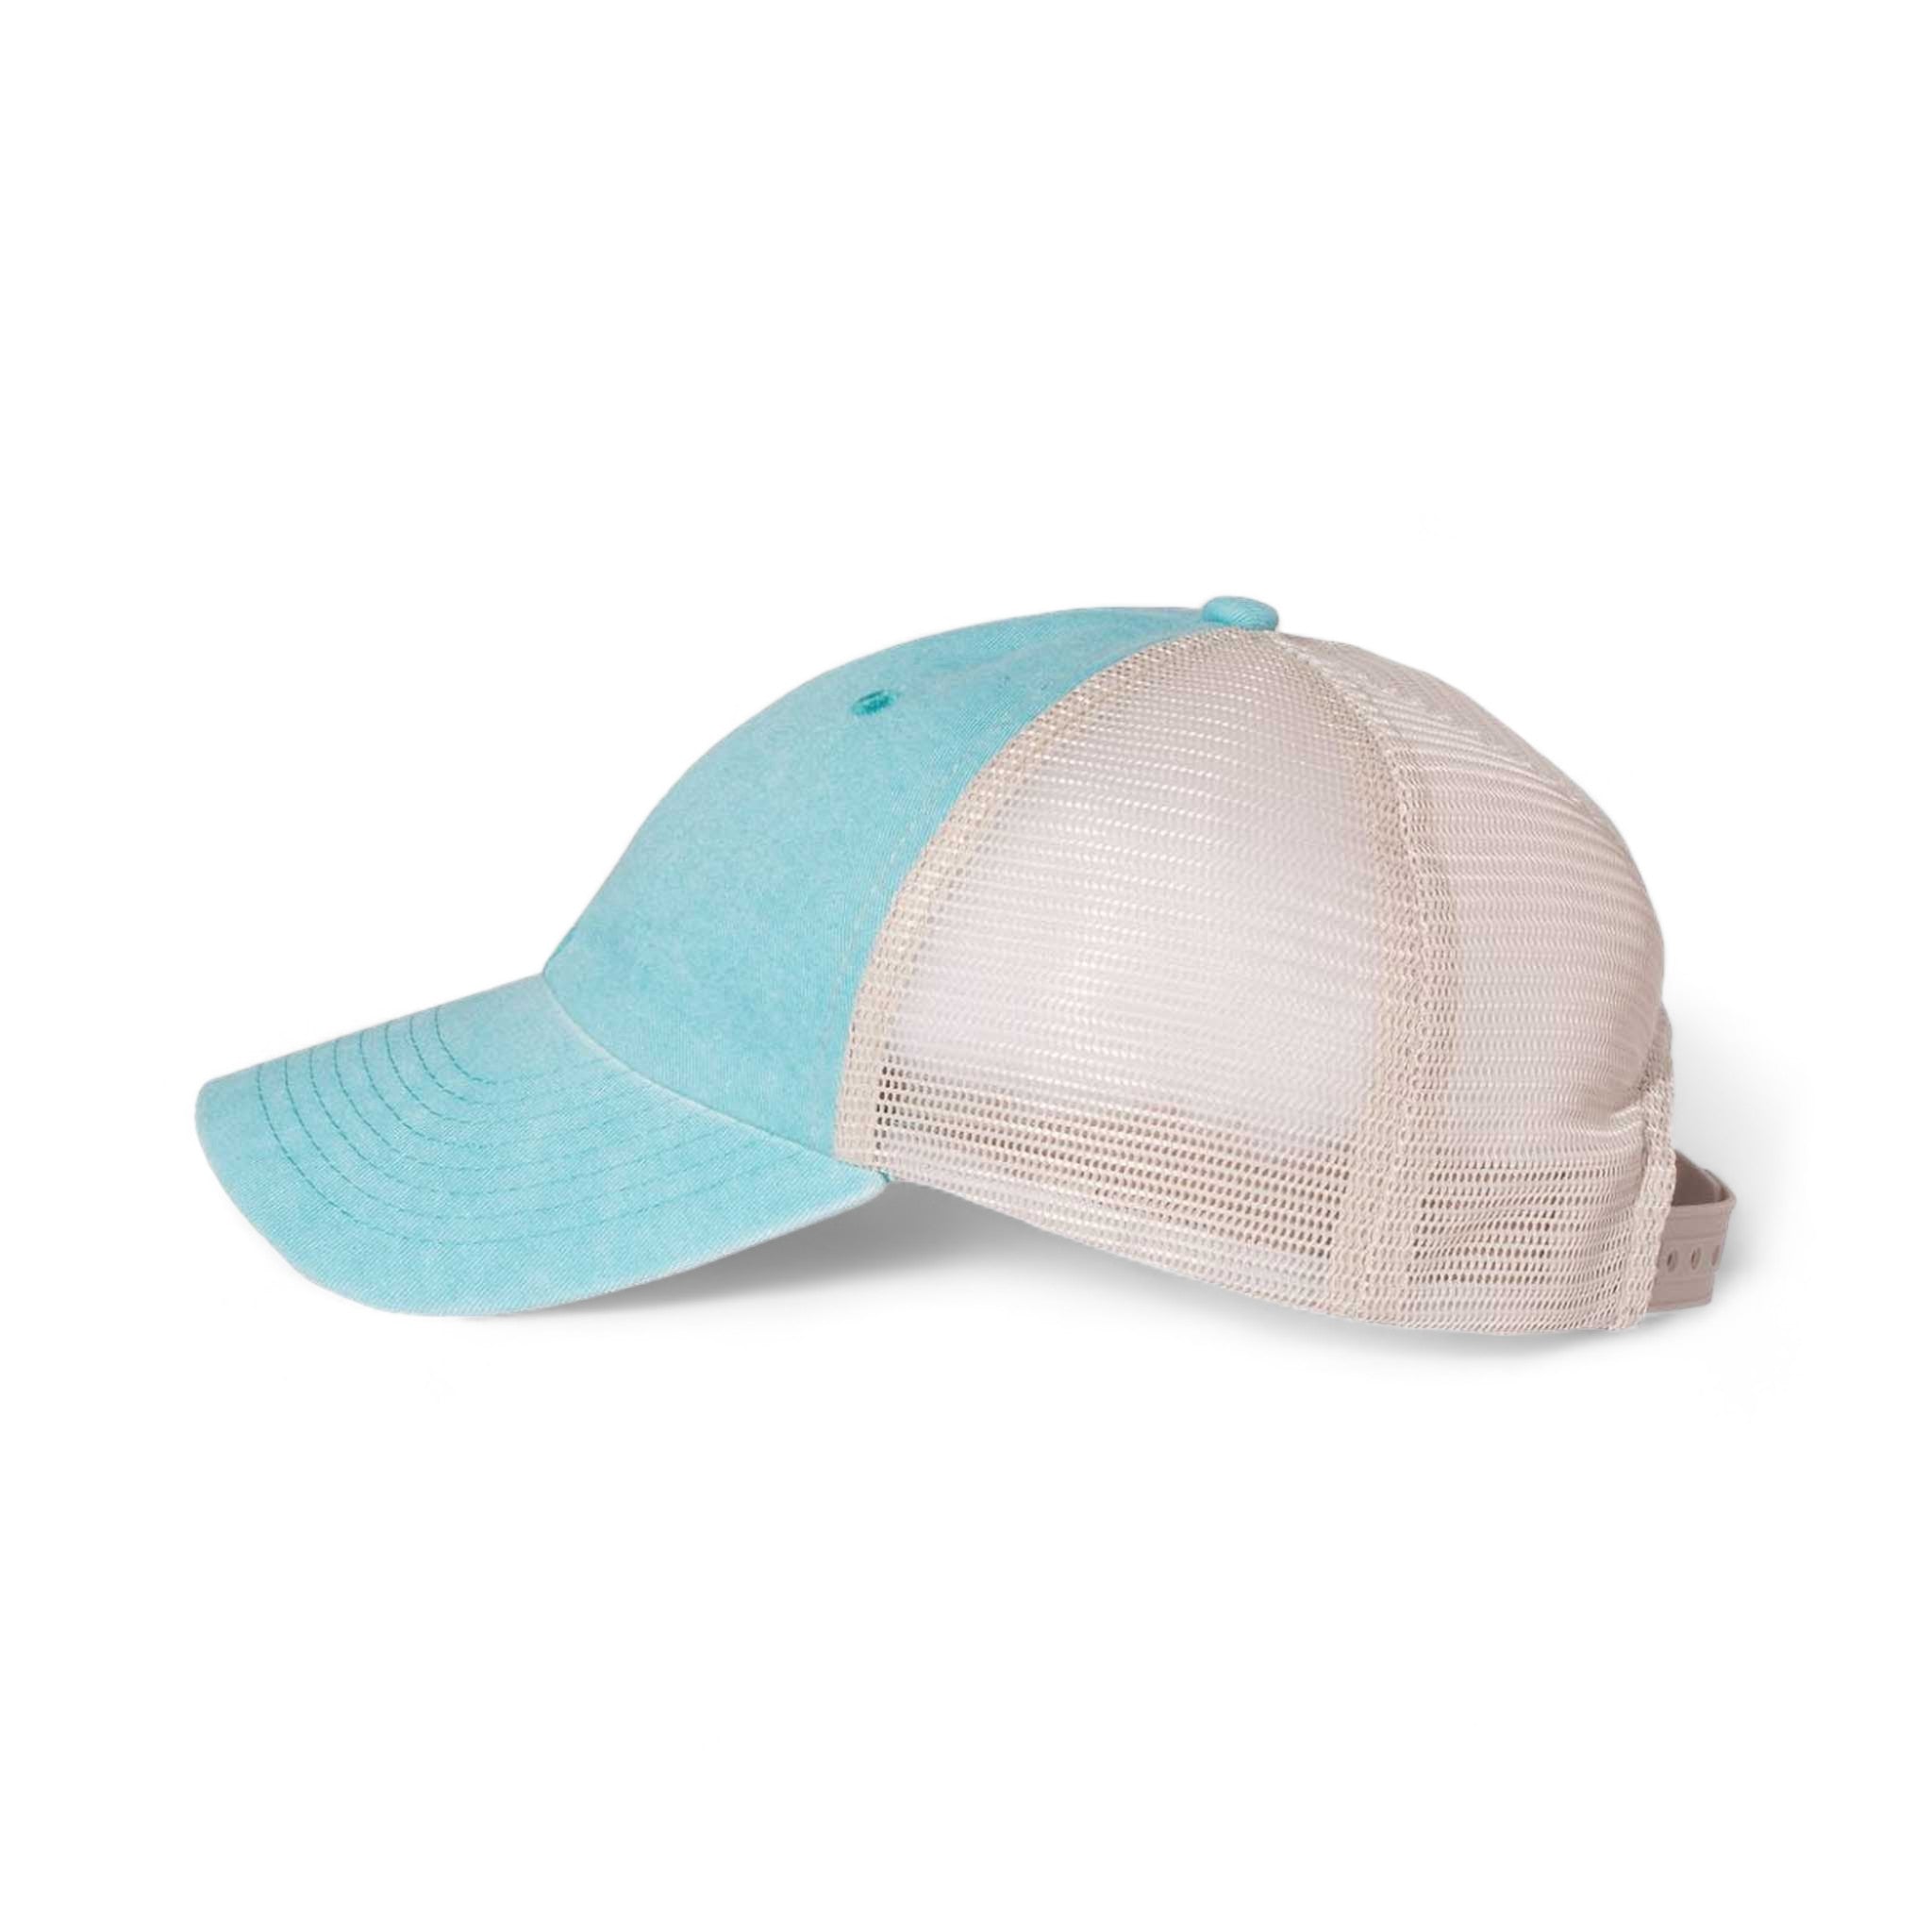 Side view of Sportsman SP510 custom hat in aqua and stone